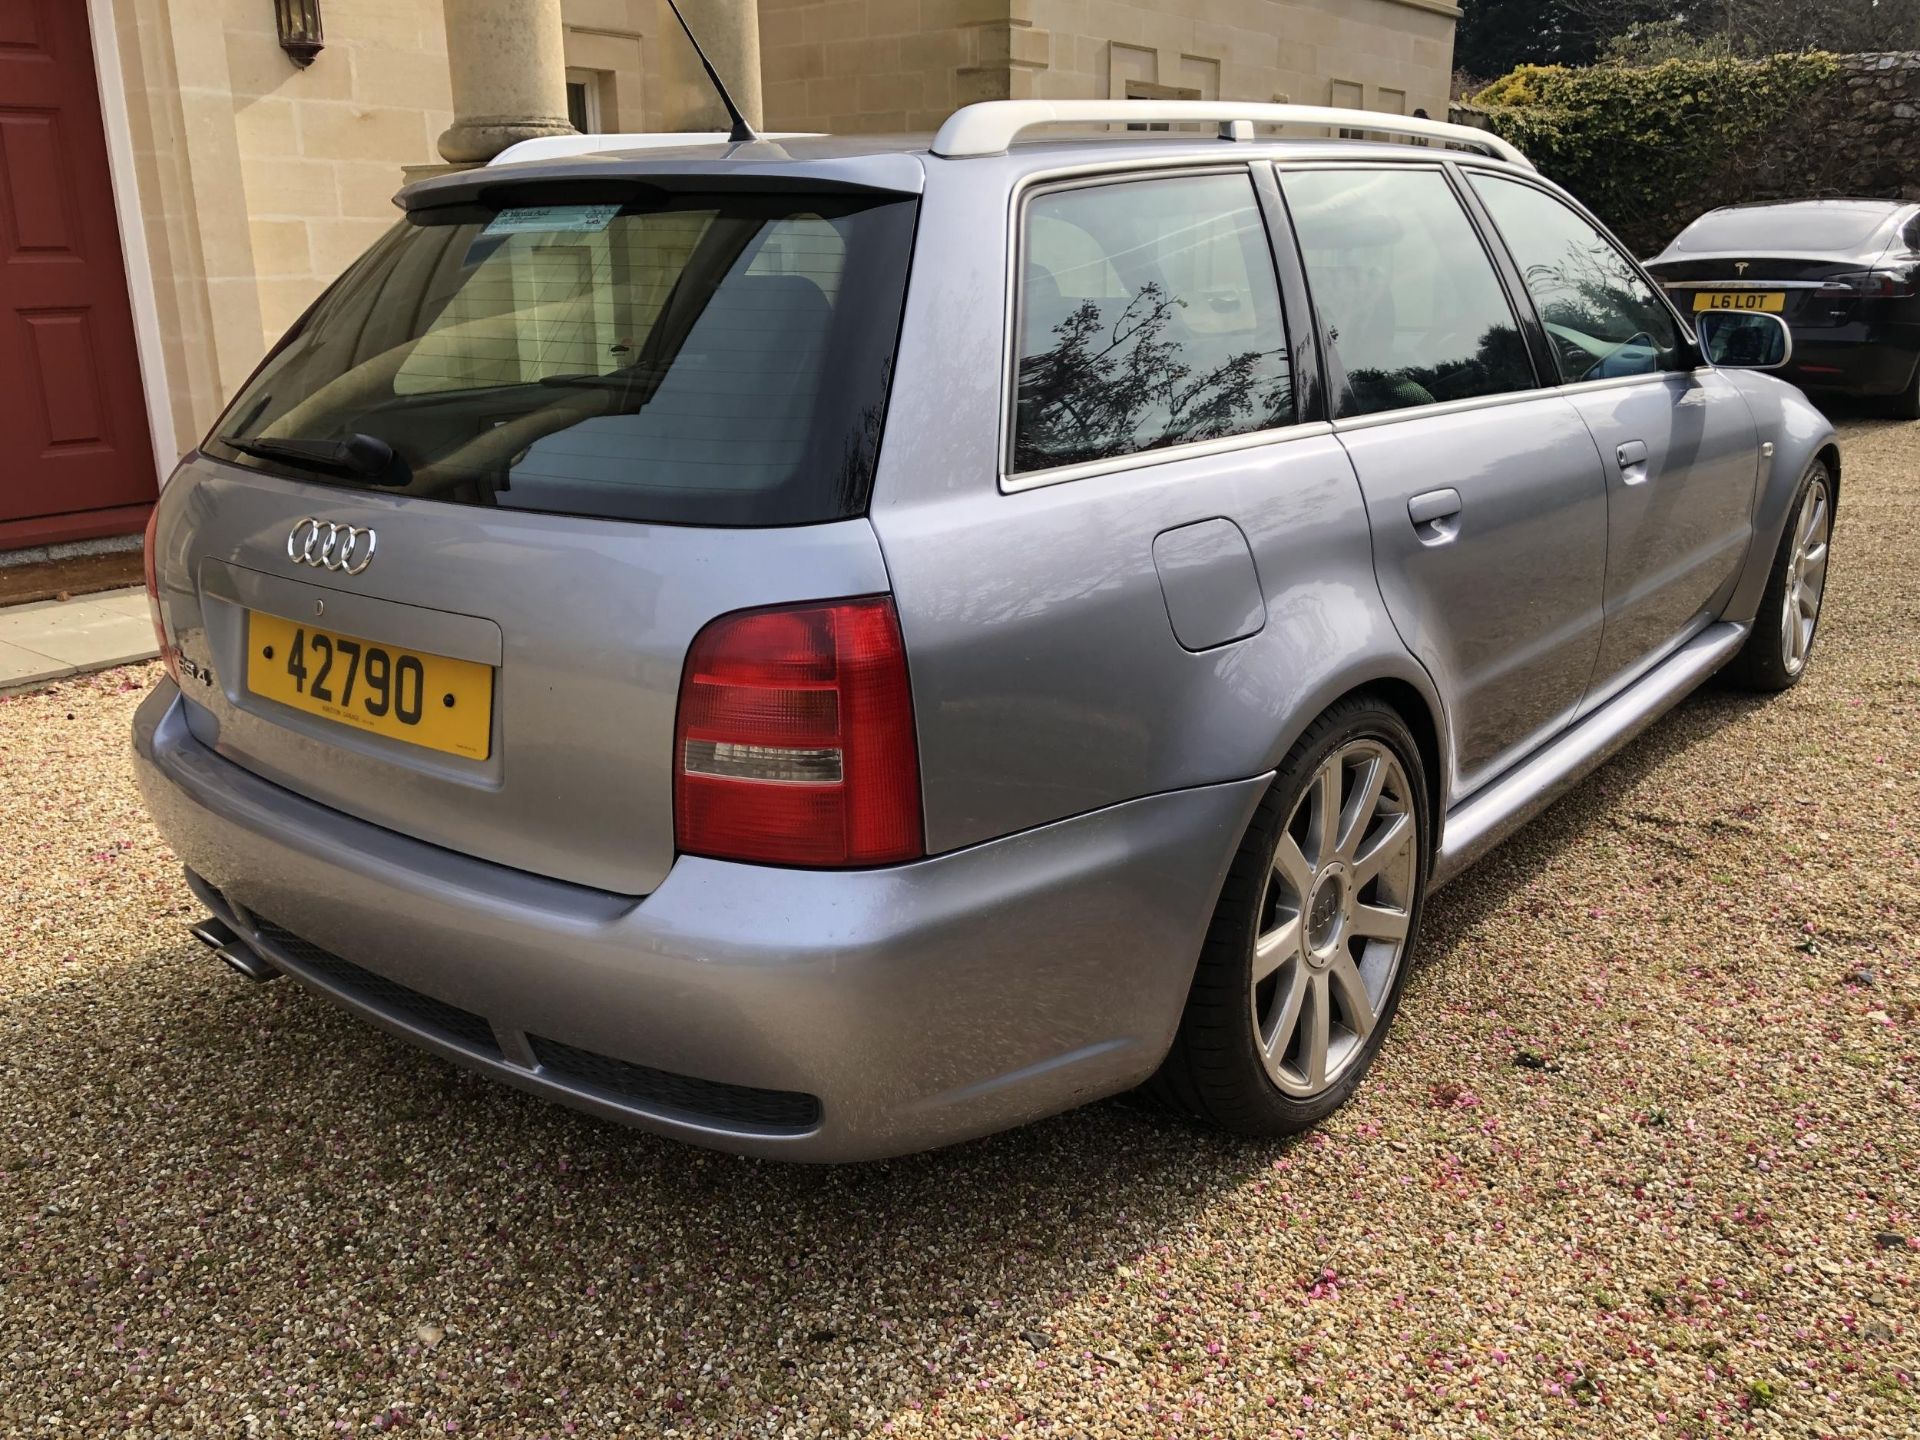 2000 Audi RS4 Avant B5 Registration number 42790 Chassis number WUAZZZ8DZ1N900940 Engine number - Image 4 of 46